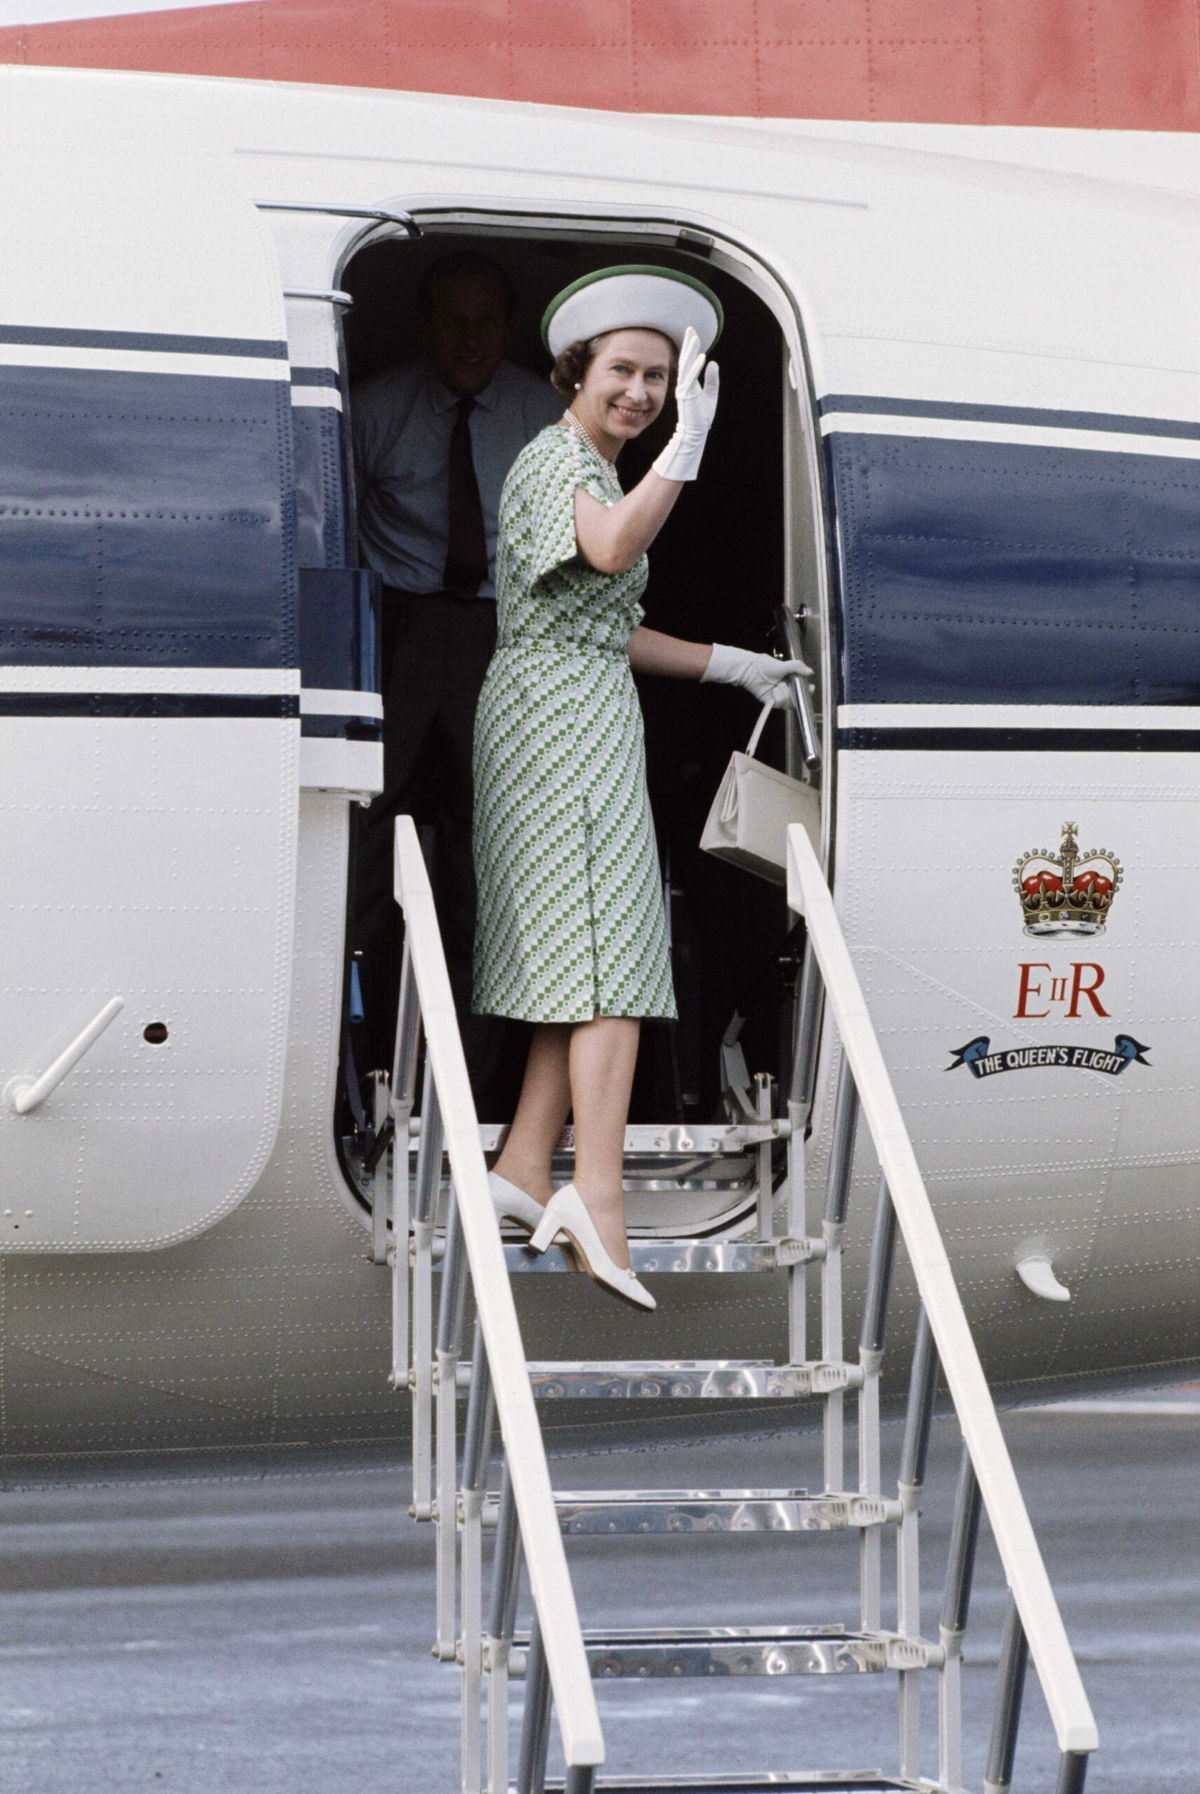 <i>Serge Lemoine/Hulton Royals Collection/Getty Images</i><br/>Queen Elizabeth II leaves Fiji during her royal tour on February 1977. Prince Philip is just visible behind her.